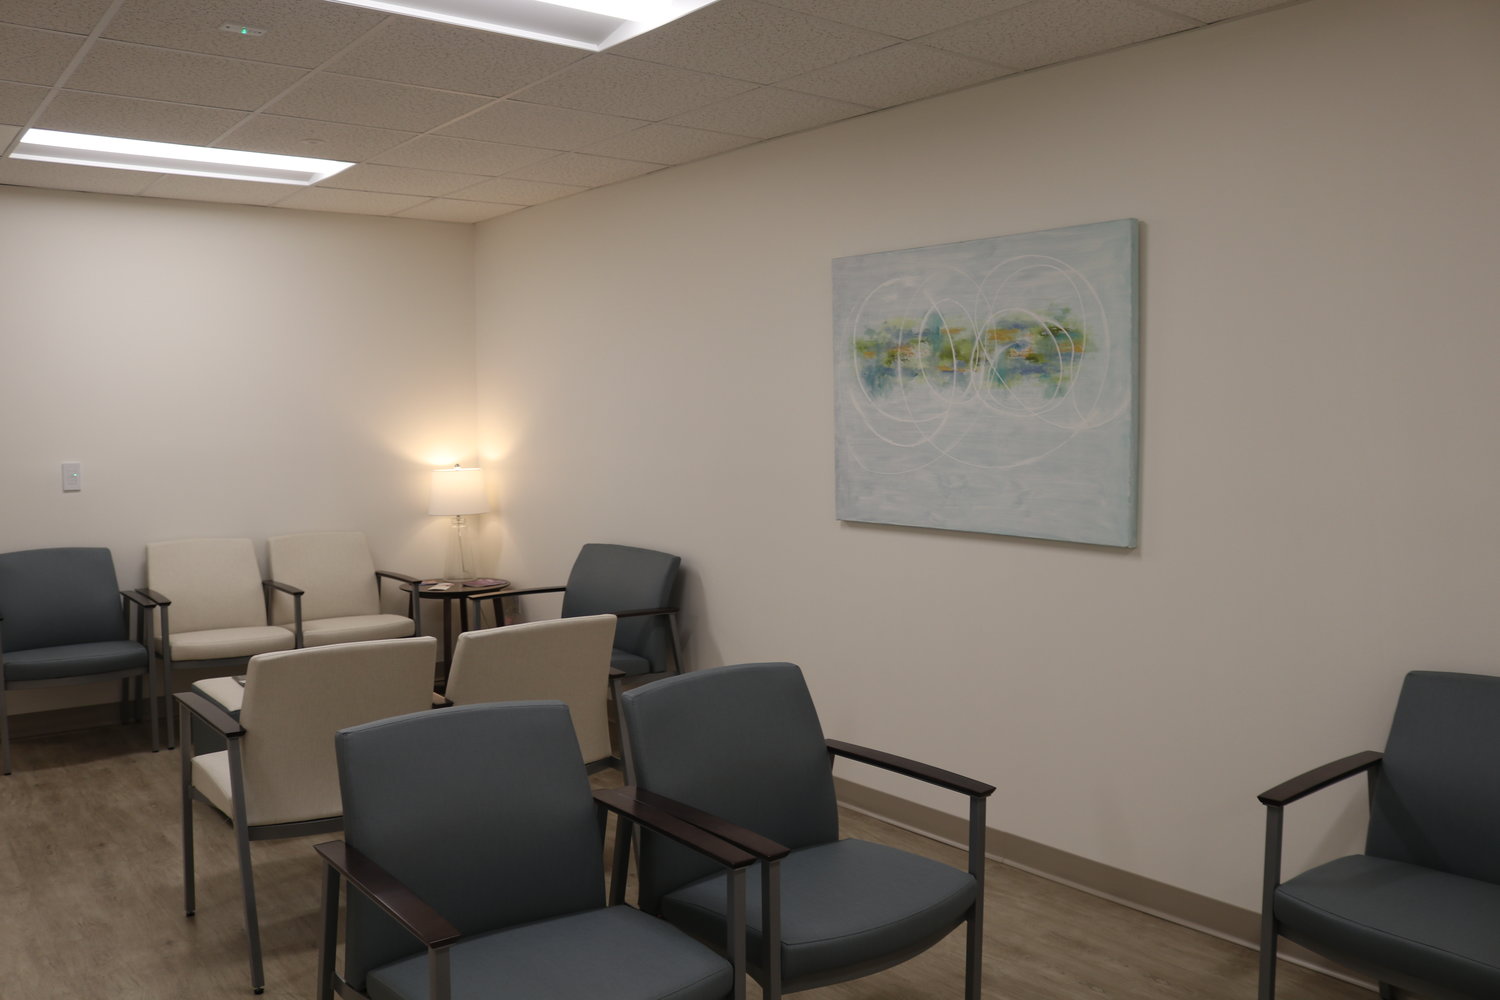 South Baldwin Medical Group - Obstetrics and Gynecology offers multiple waiting rooms for patients prior to seeing their provider.